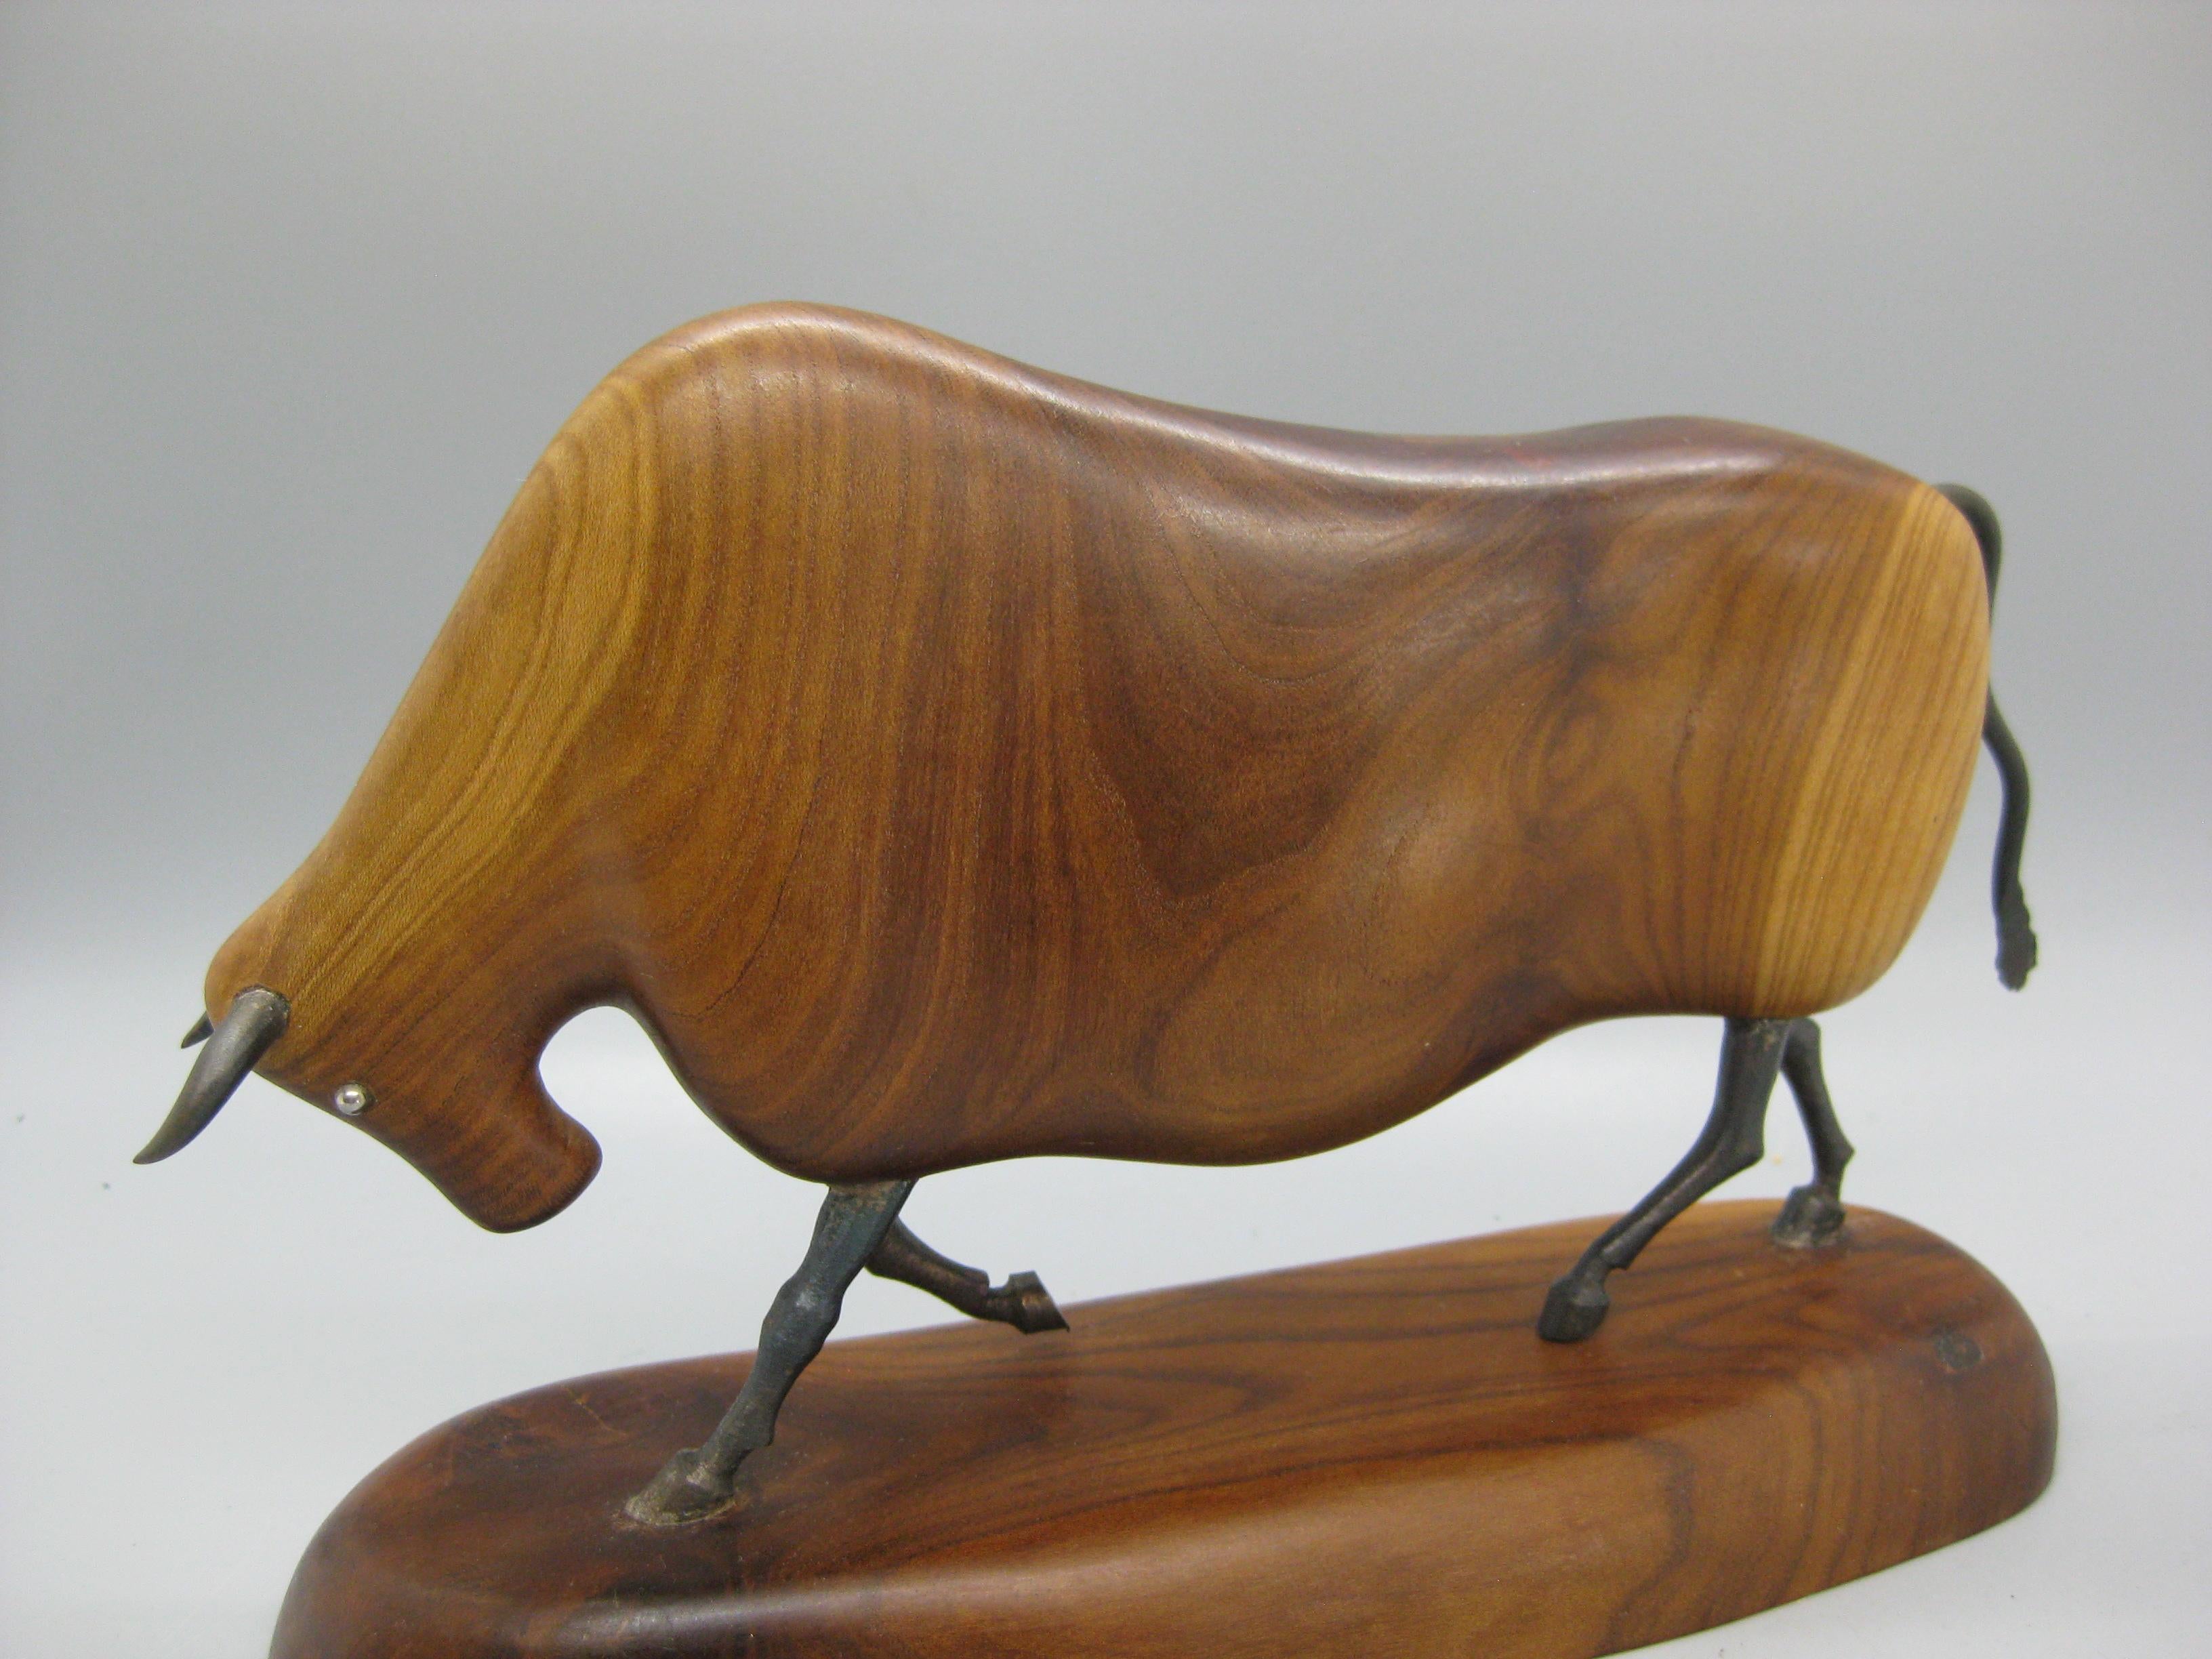 We are offering a wonderful modernist Bull figural sculpture carving. The sculpture was hand carved. Made of wood and has wrought iron horns, legs and tail. Signed on the bottom by the artist. I am not sure who the artist was. Wonderful form and